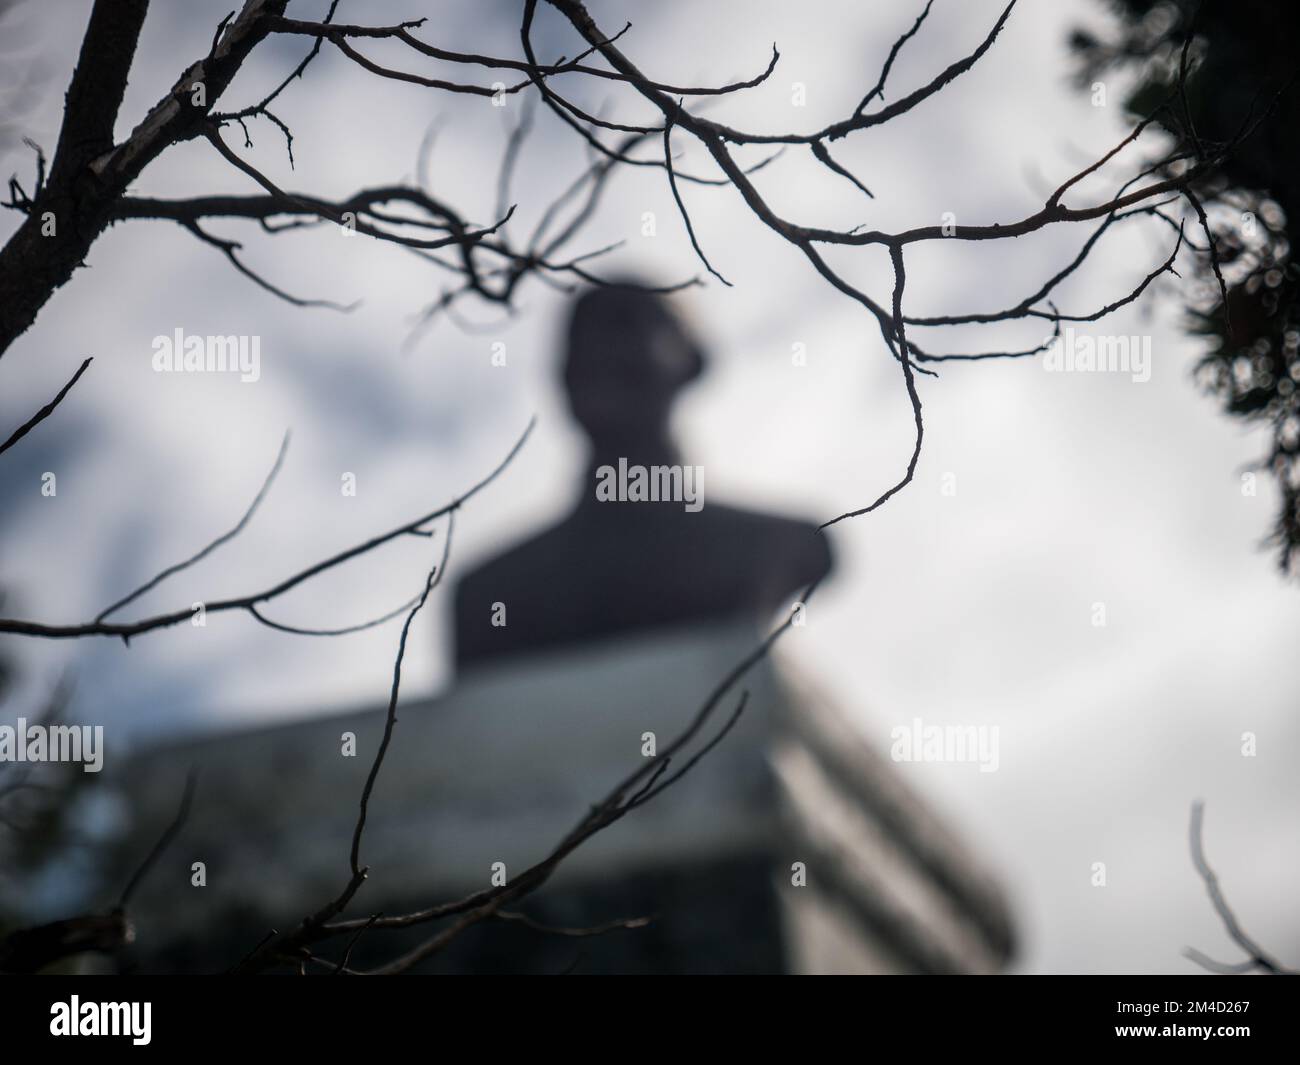 Bust of Chiang Kai-Shek in Green Island prison Taiwan, framed by branches Stock Photo